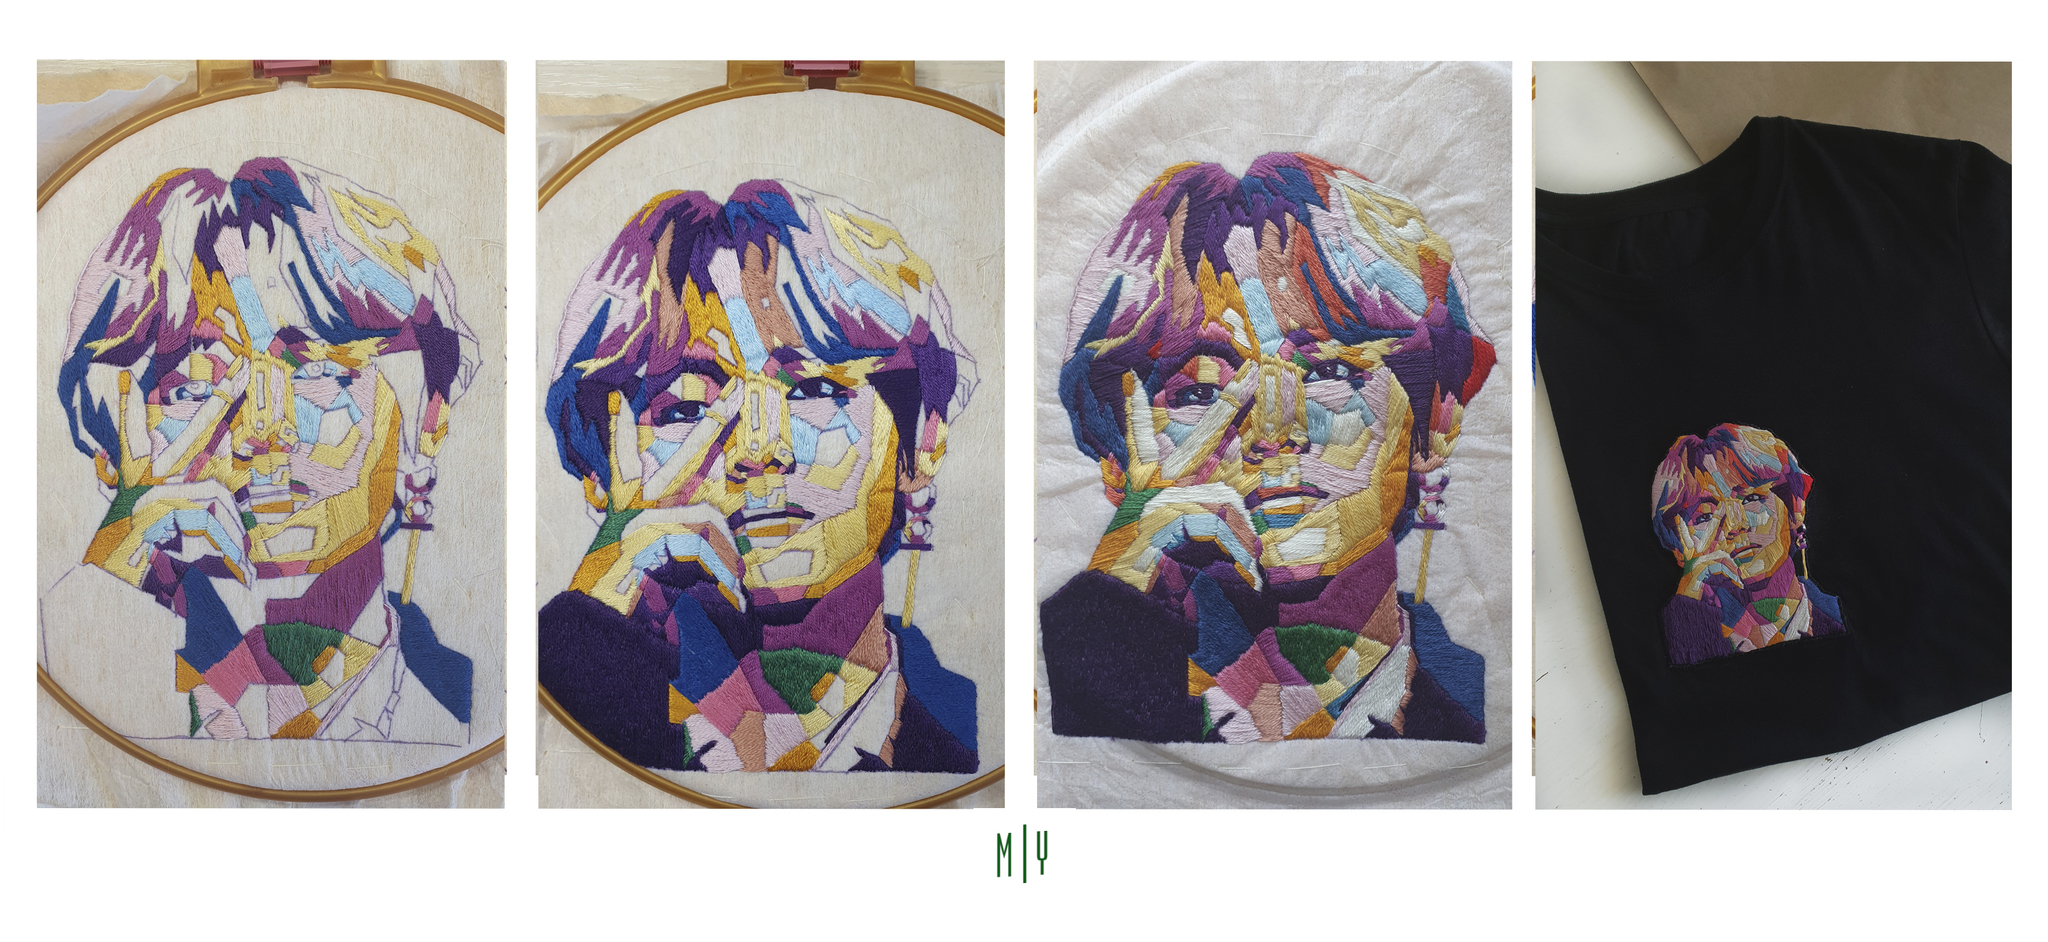 Gift for a BTS fan. Hand embroidery by Kim Tae-hyung - My, Handmade, Embroidery, Satin stitch embroidery, T-shirt, Корея, Boyband, Bts, Needlework with process, Koreans, k-Pop, Musical group, Print, Creation, Fans, Fan art, Needlework, Longpost, Art